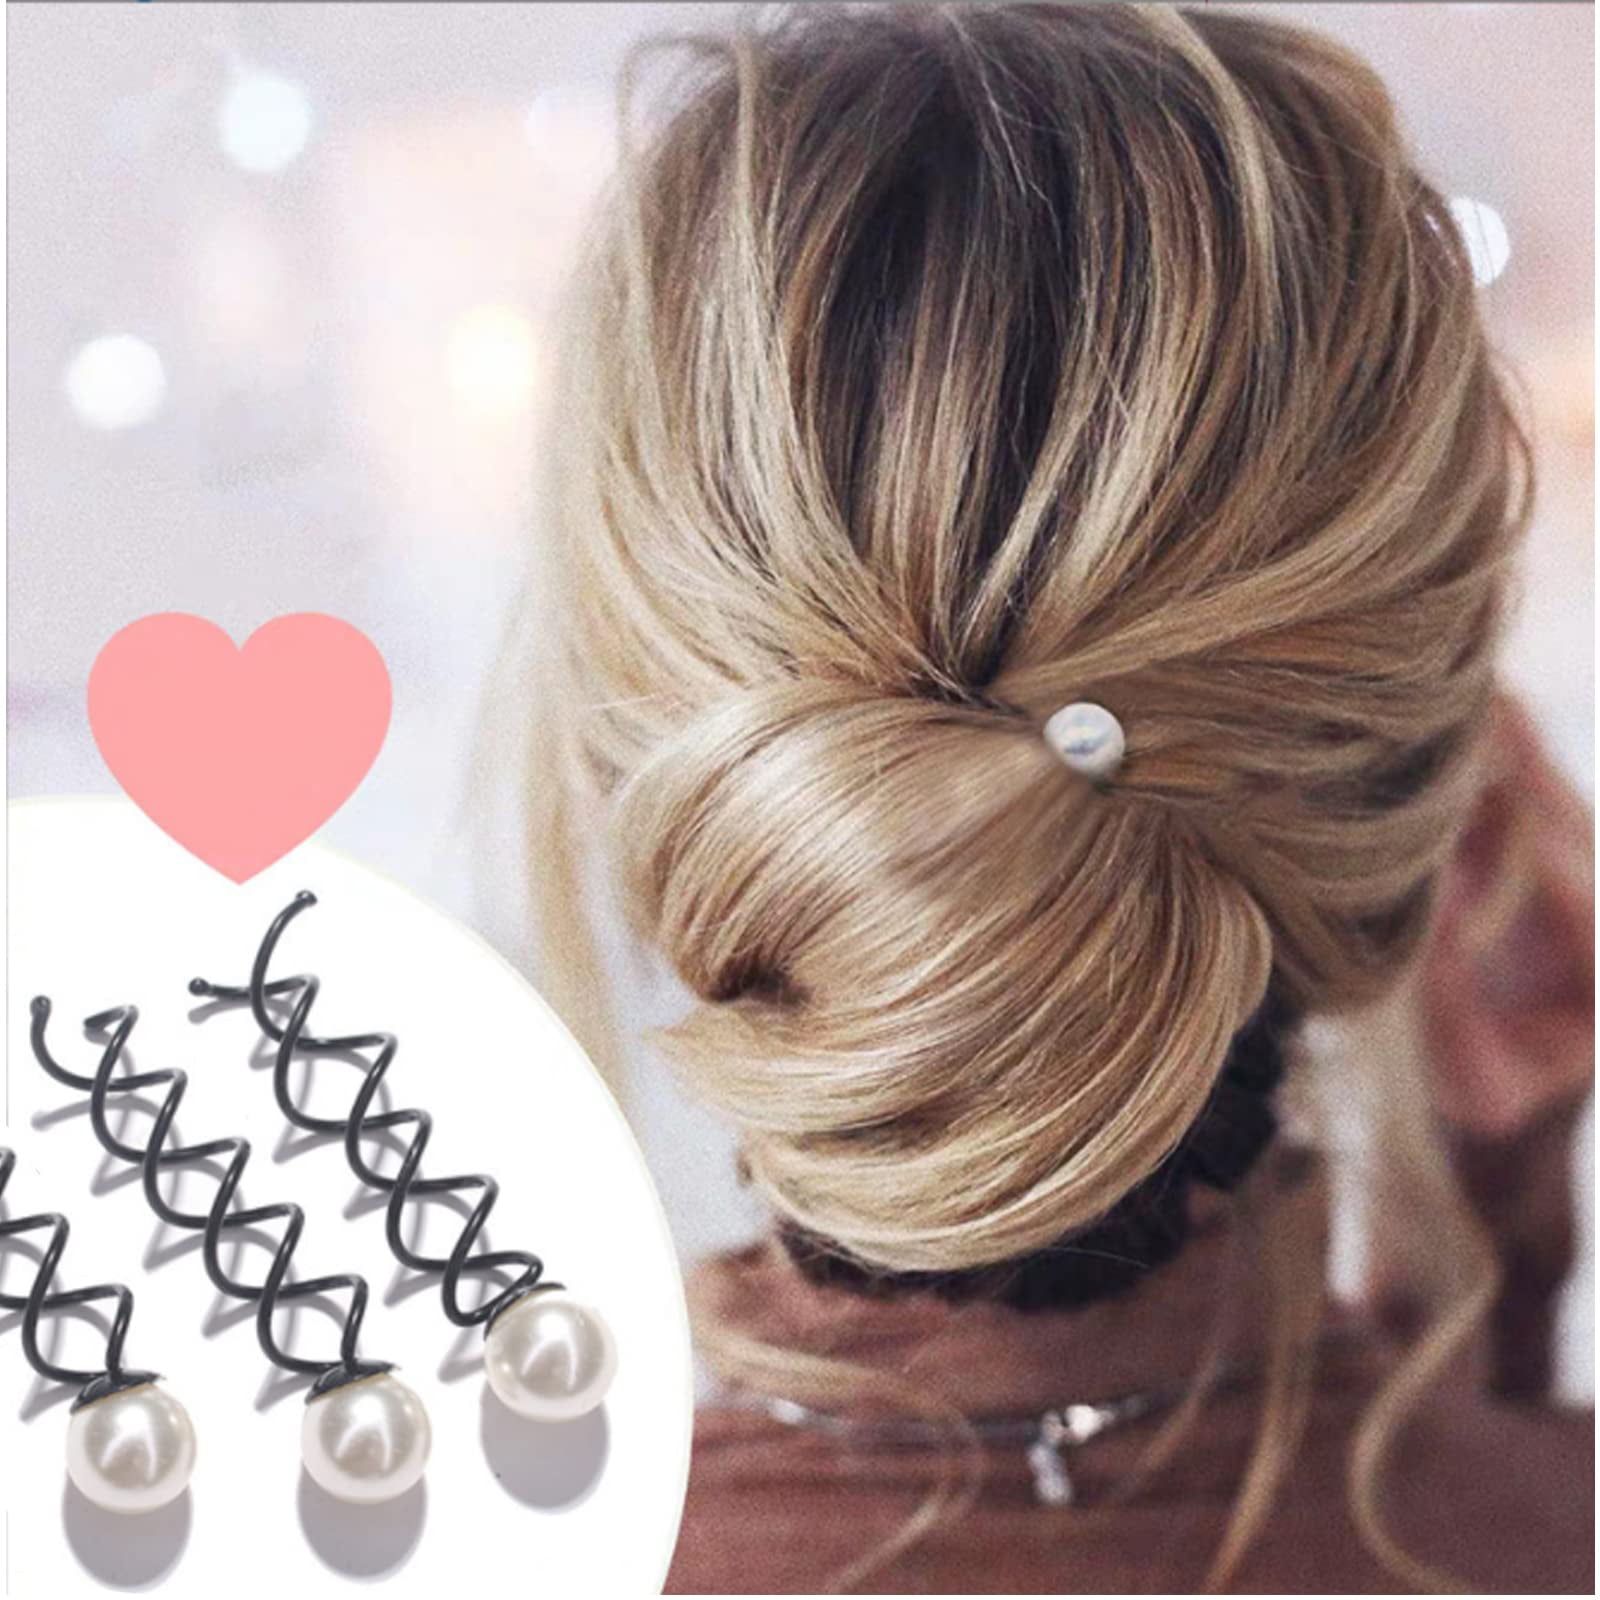 Buy 50PCS Spiral Hair Pins FANDAMEI Spin Pins NonScratch Round Tips  Twist Screw Hair Pin for Women Bun Hair Style DIY Spiral Bobby Pins Black  Online at Low Prices in India 